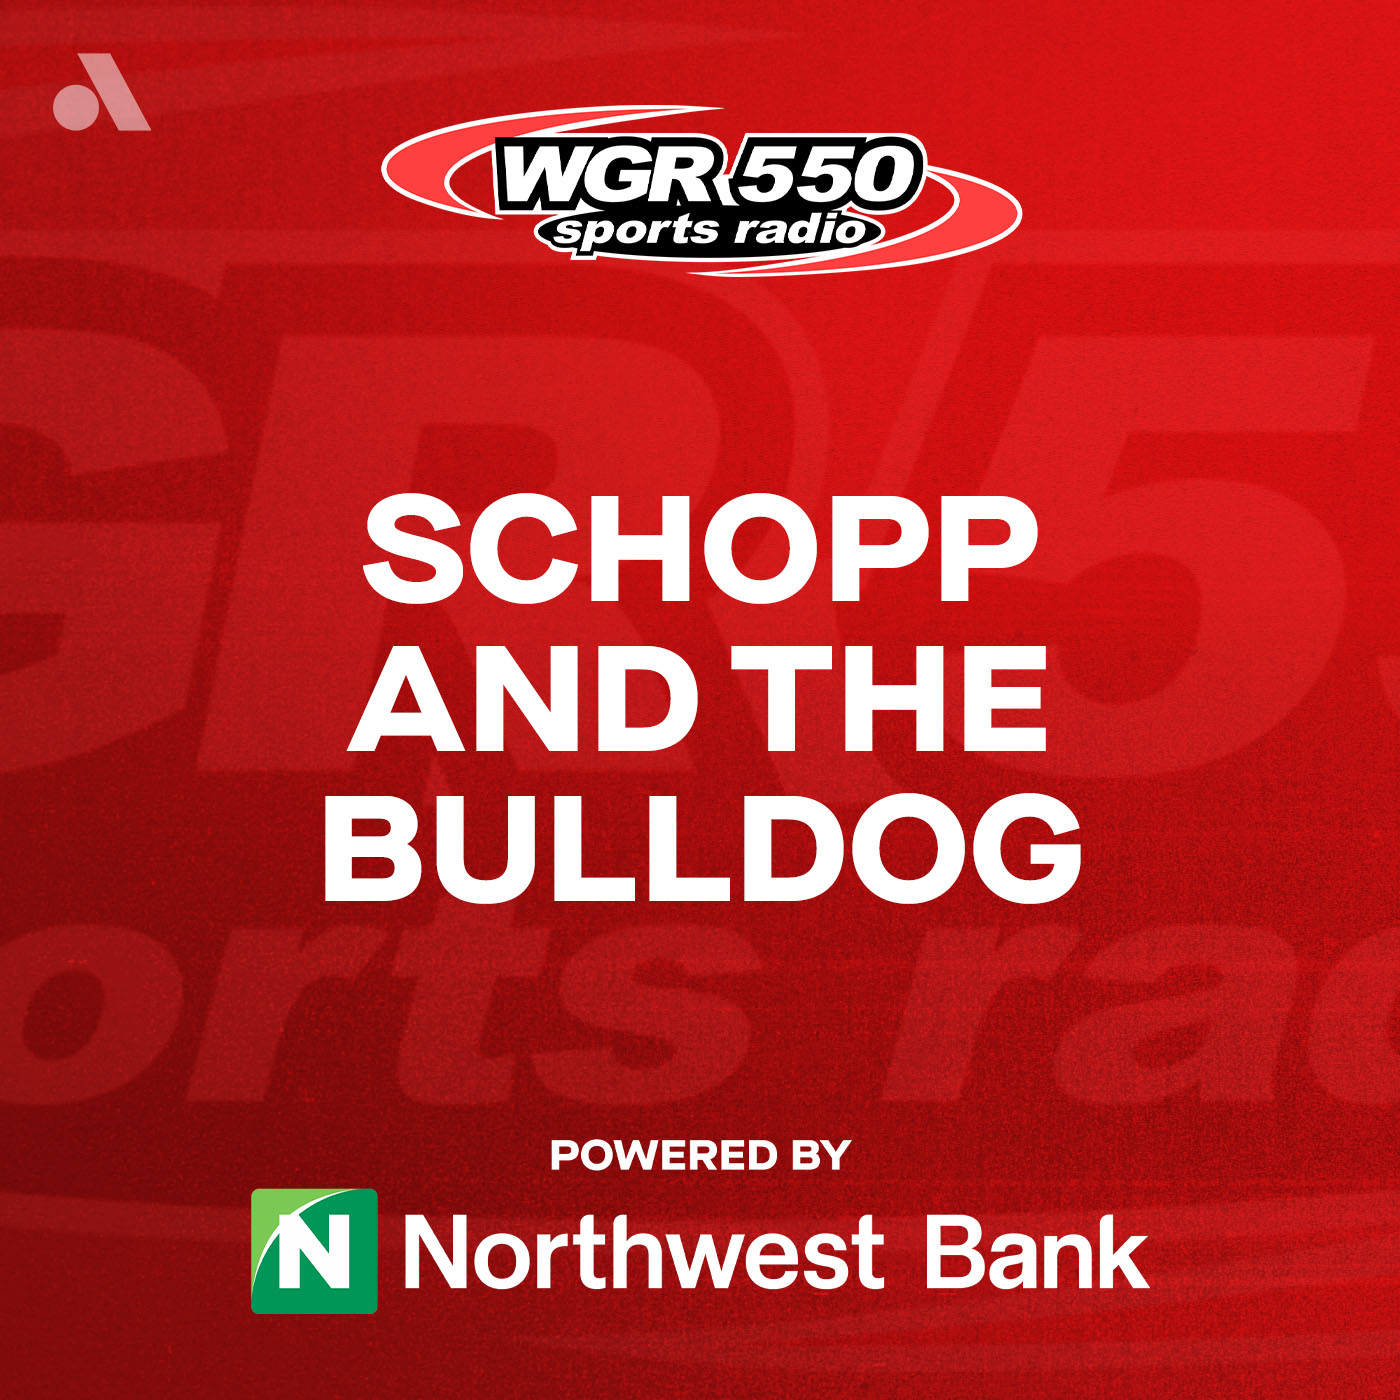 11-08 Sabres-Lightning Post-Game Show with Schopp and the Bulldog